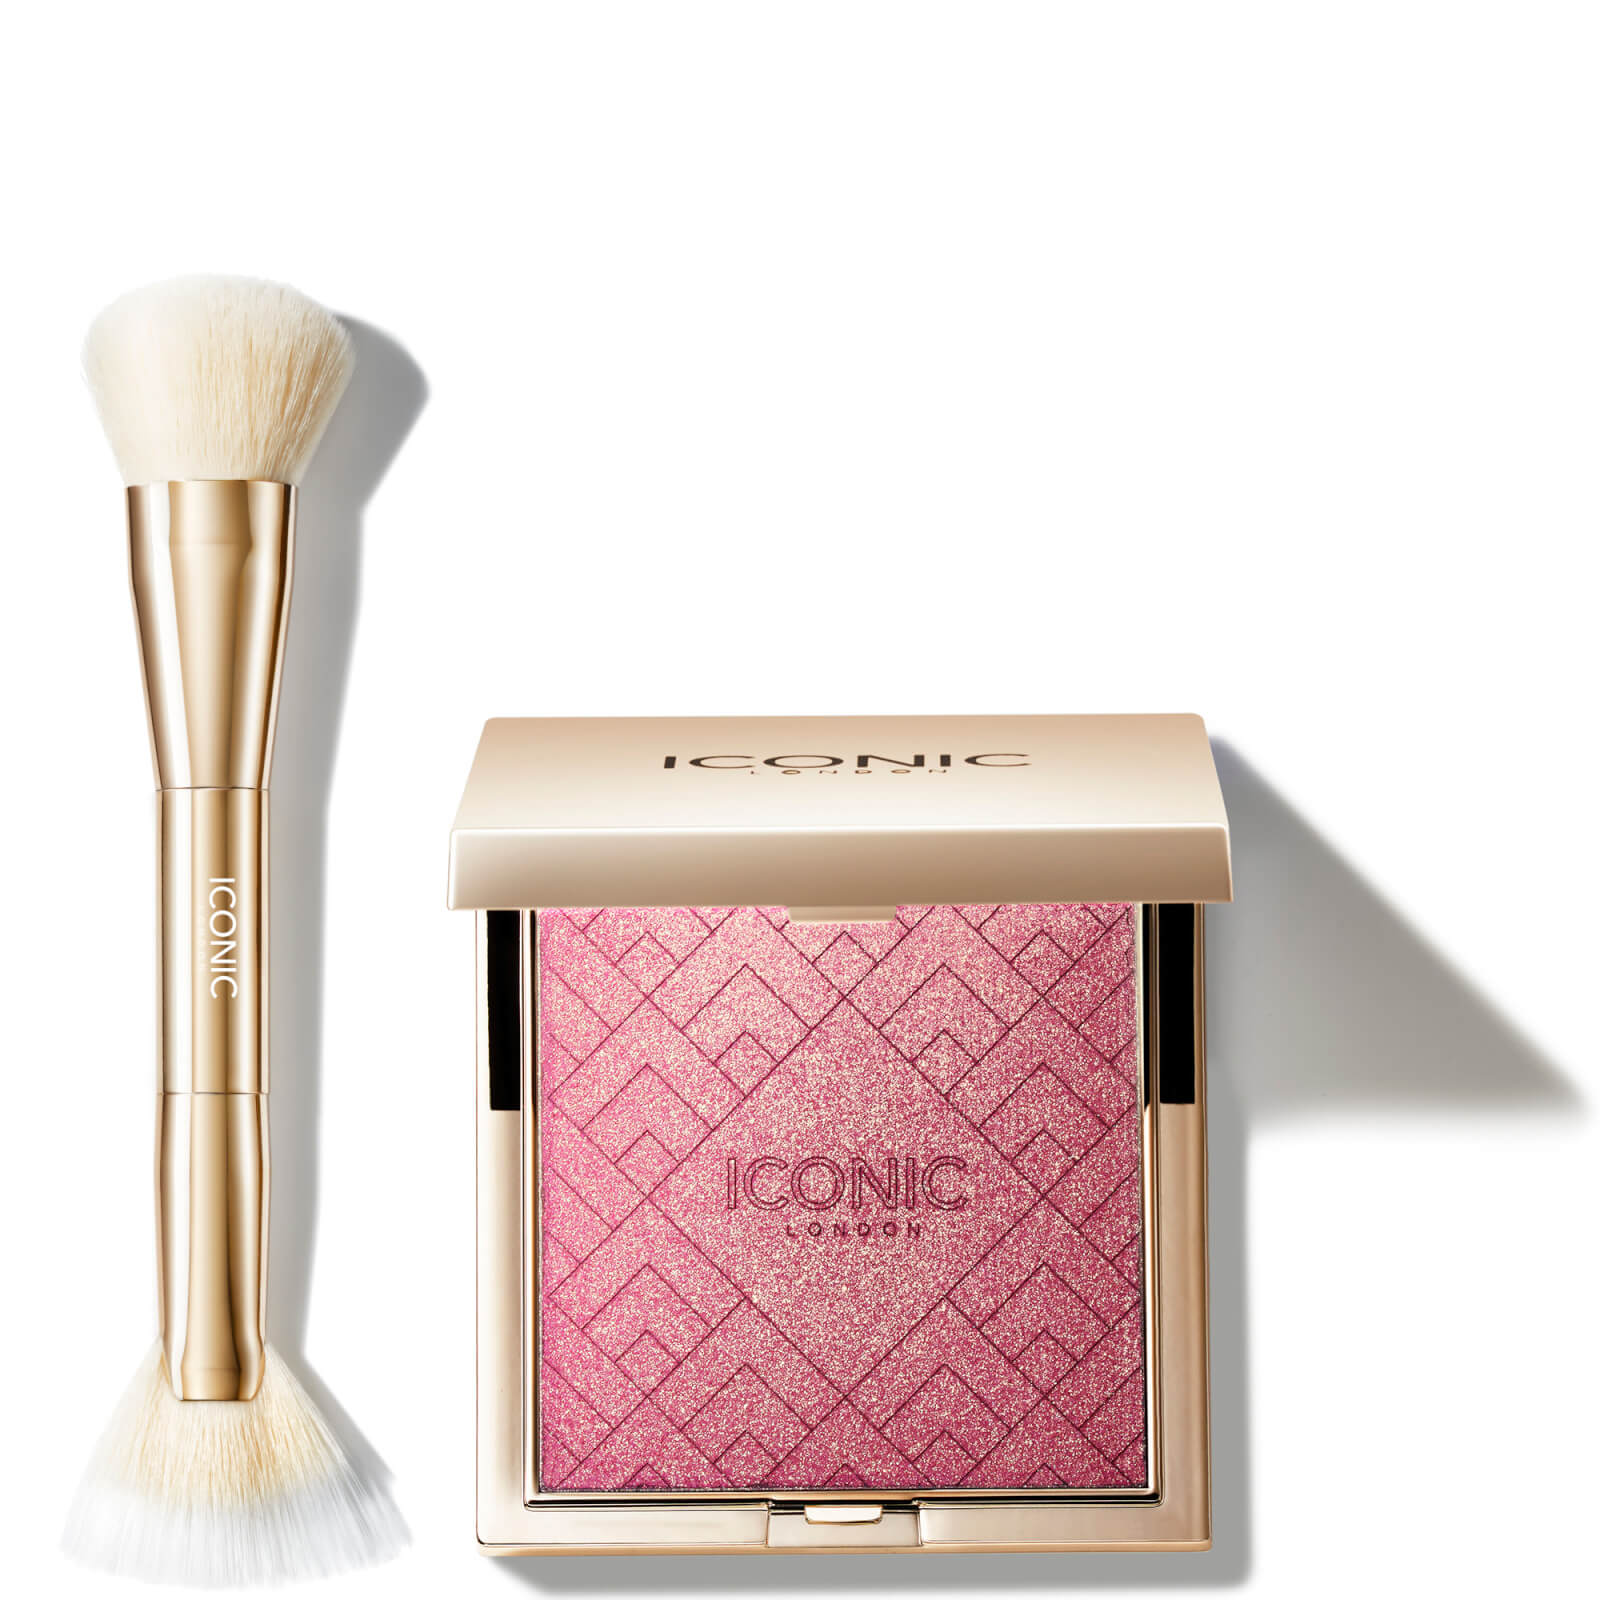 Iconic London Kissed By The Sun Multi-use Cheek Glow And Brush (various Shades) - Play Time In White